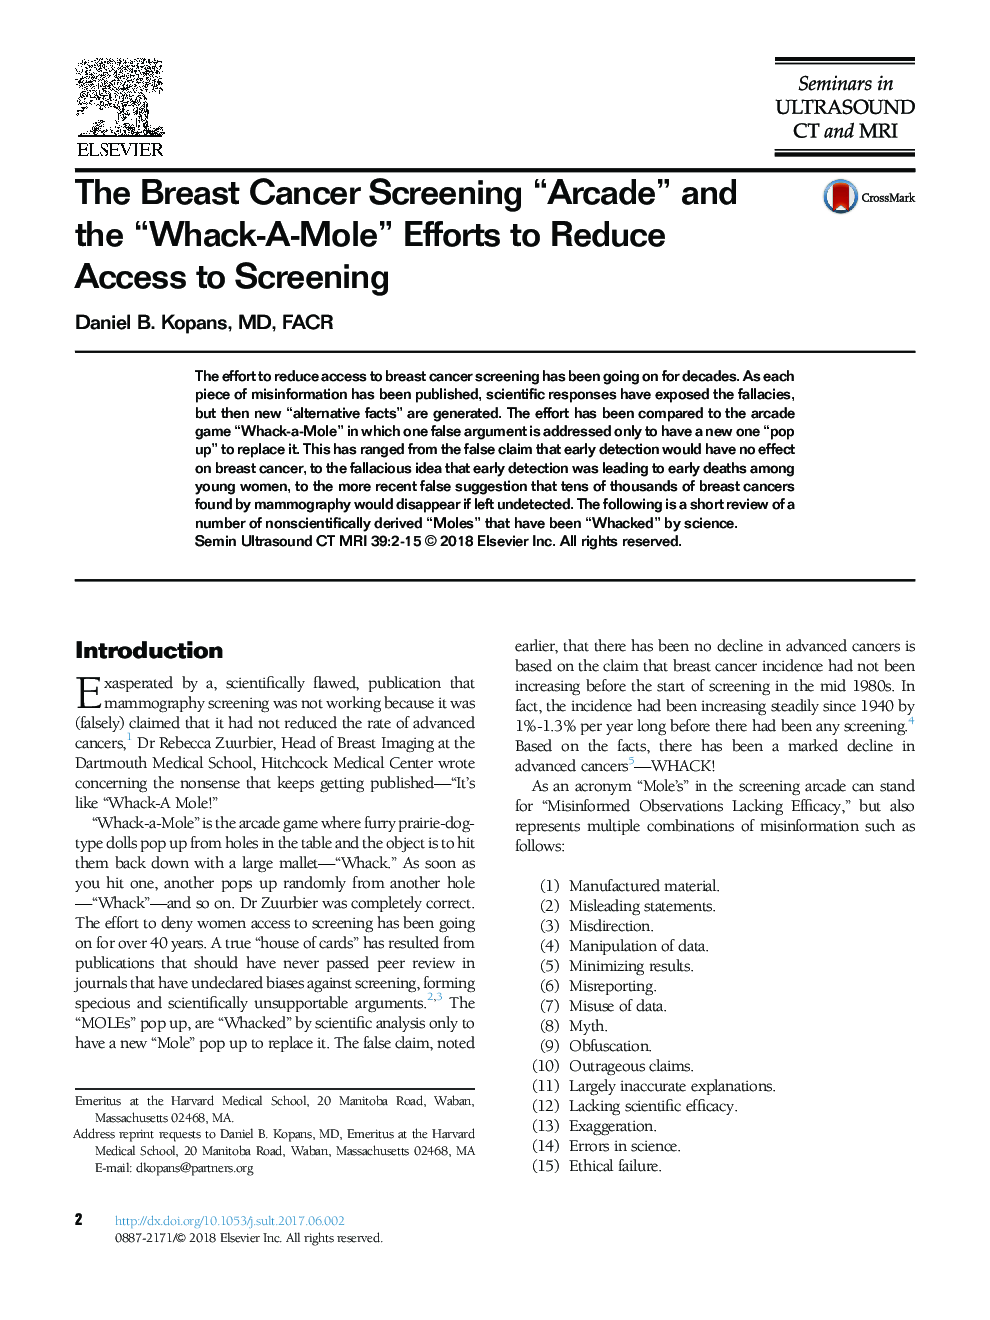 The Breast Cancer Screening “Arcade” and the “Whack-A-Mole” Efforts to Reduce Access to Screening